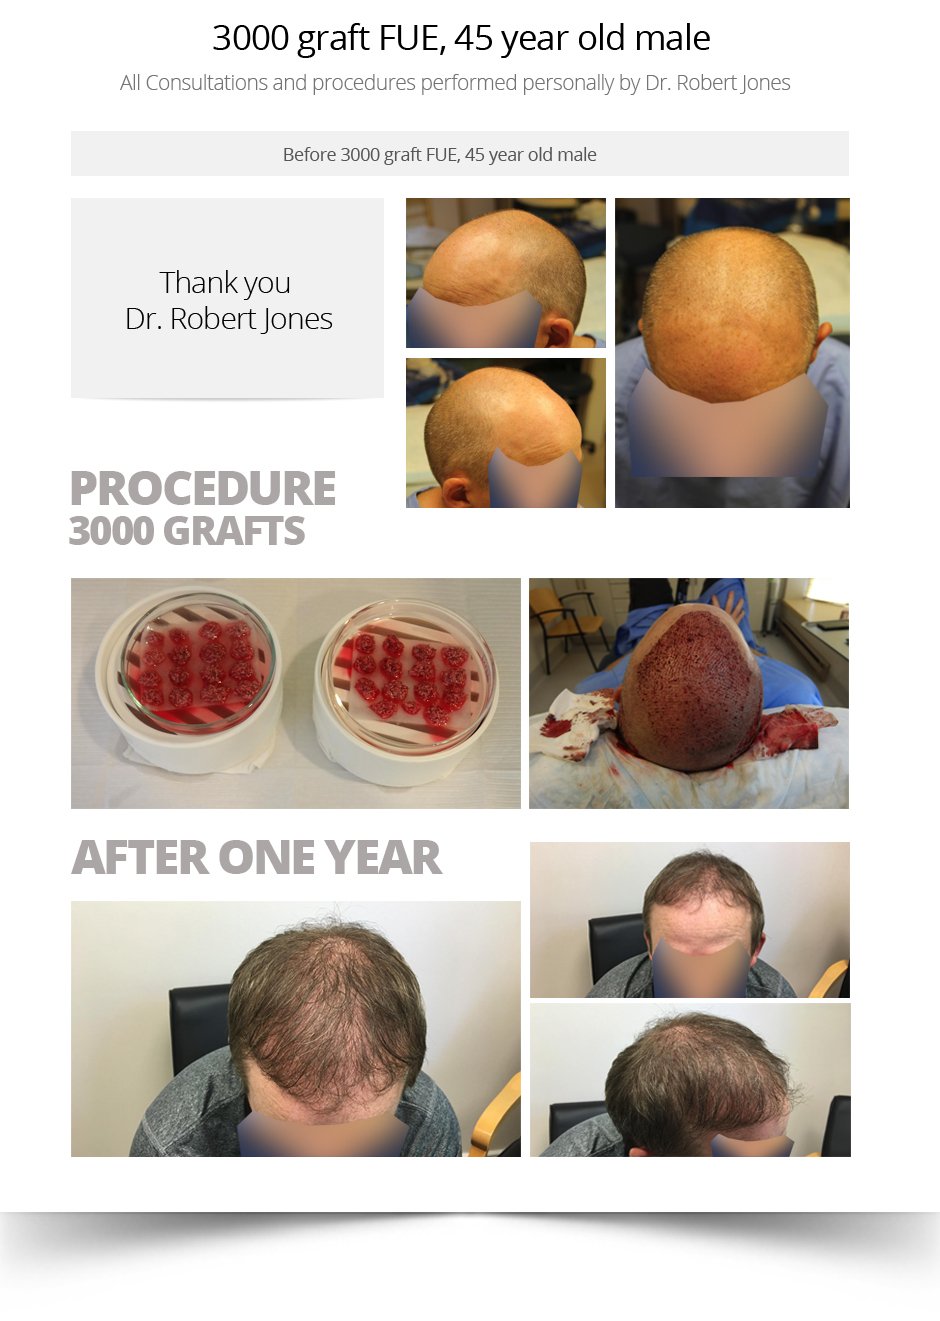 Case-Study-2-3000-Graft-FUE-45-year-old-male-img-1